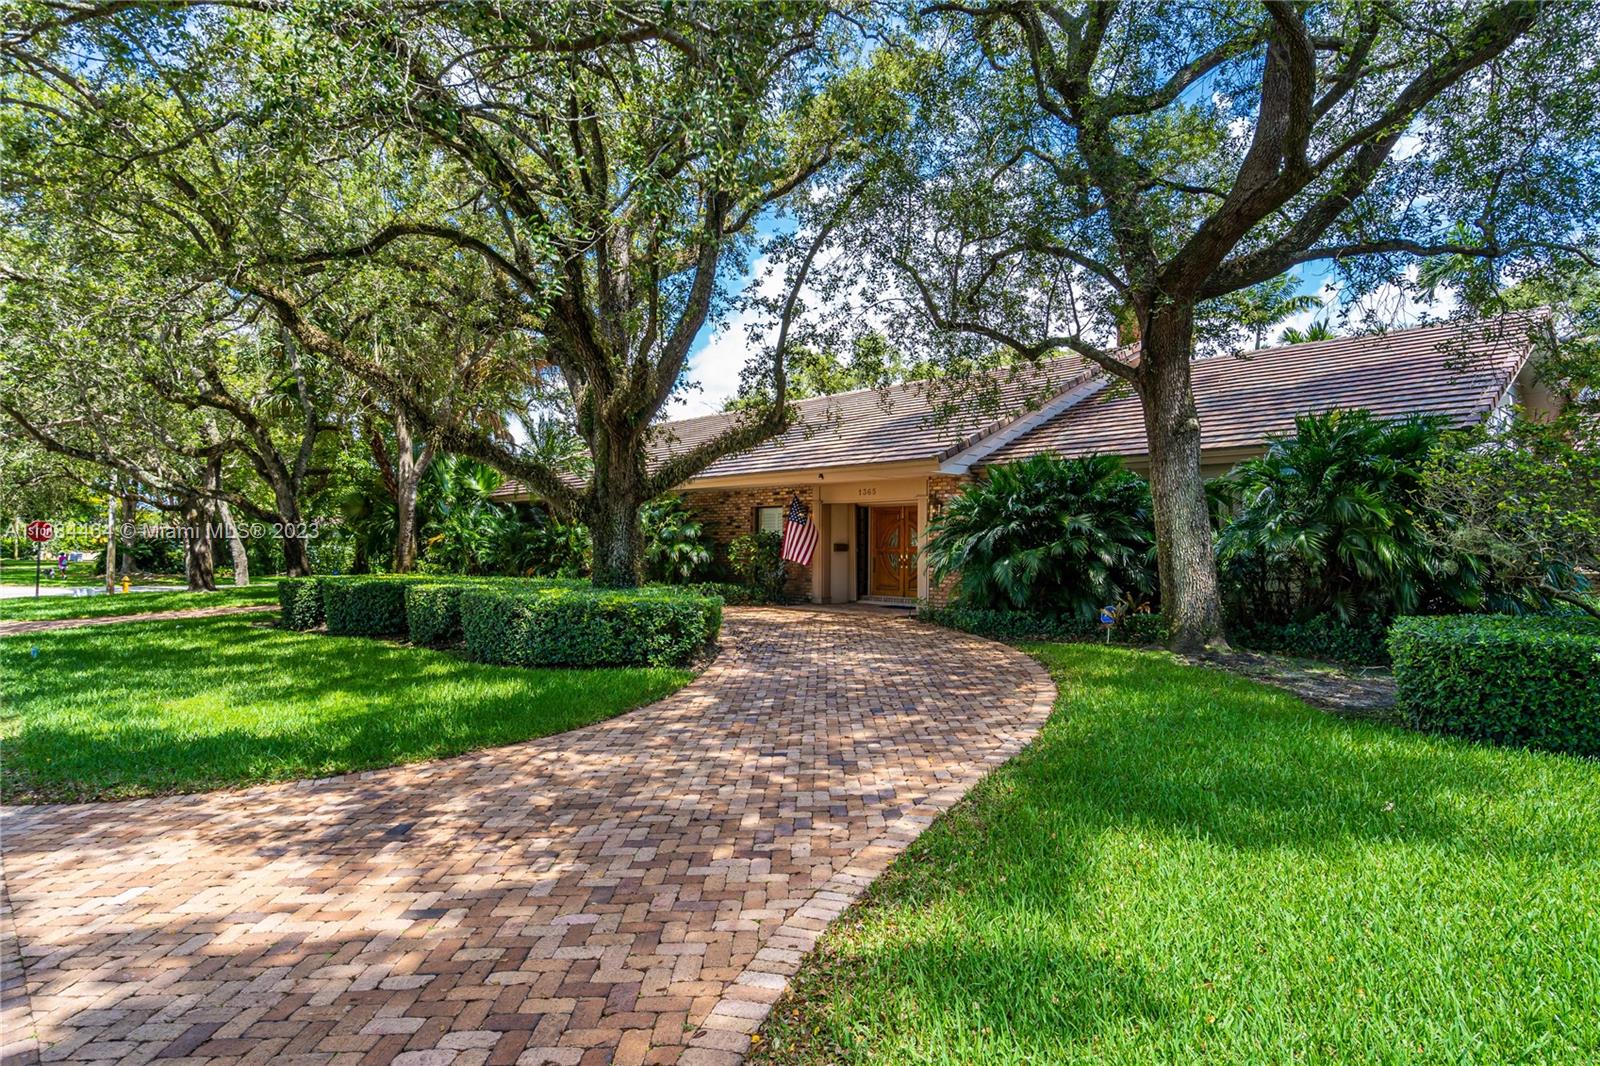 Indulge in the elegant charm of this immaculate and spacious 4/3.5 Ranch style home just 2 blocks away from exclusive Riviera Country Club.  Relish walking through tree-lined streets to the golf course, University of Miami or even a nearby park.  The brick-paved circular driveway welcomes you through French doors into a comfortable, open and gratifying interior with continuous pool views beyond the family room's full-length glass windows. This 3613 sf home affords lavish living and dining room areas and a fully remodeled kitchen with a sizable granite countertop. Owner's suite and 2 bedrooms nestled in private wing. Office, laundry room, 2-car garage, 2 zoned A/C units, whole house generator, screened pool and reflection garden, fenced area for pets and so much more!